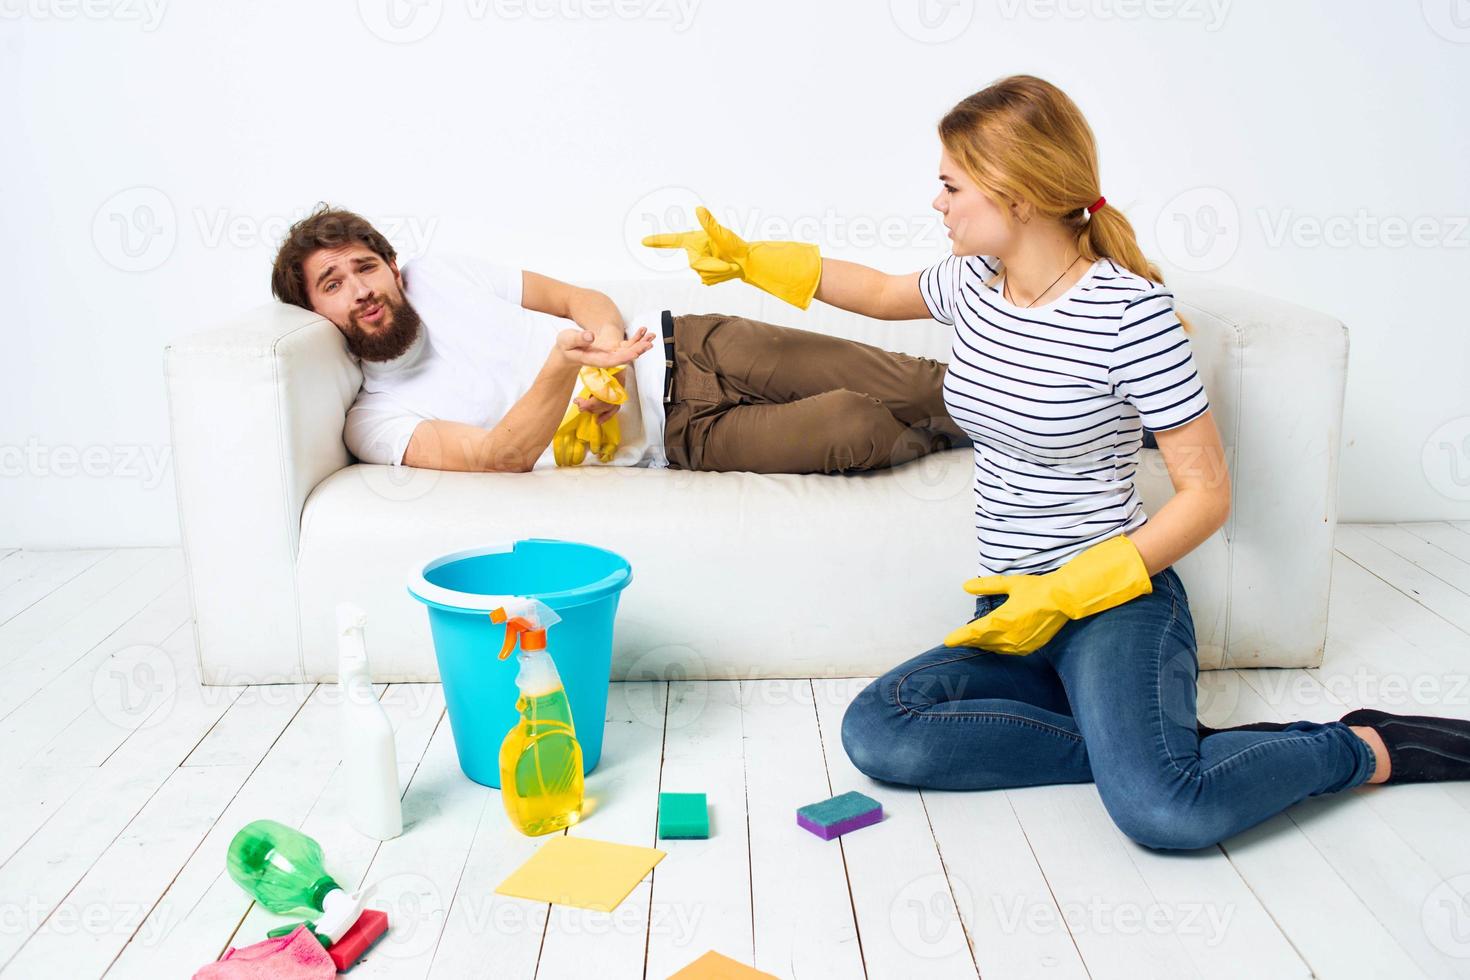 The wife cleans up while the husband lies on the couch interior housework photo